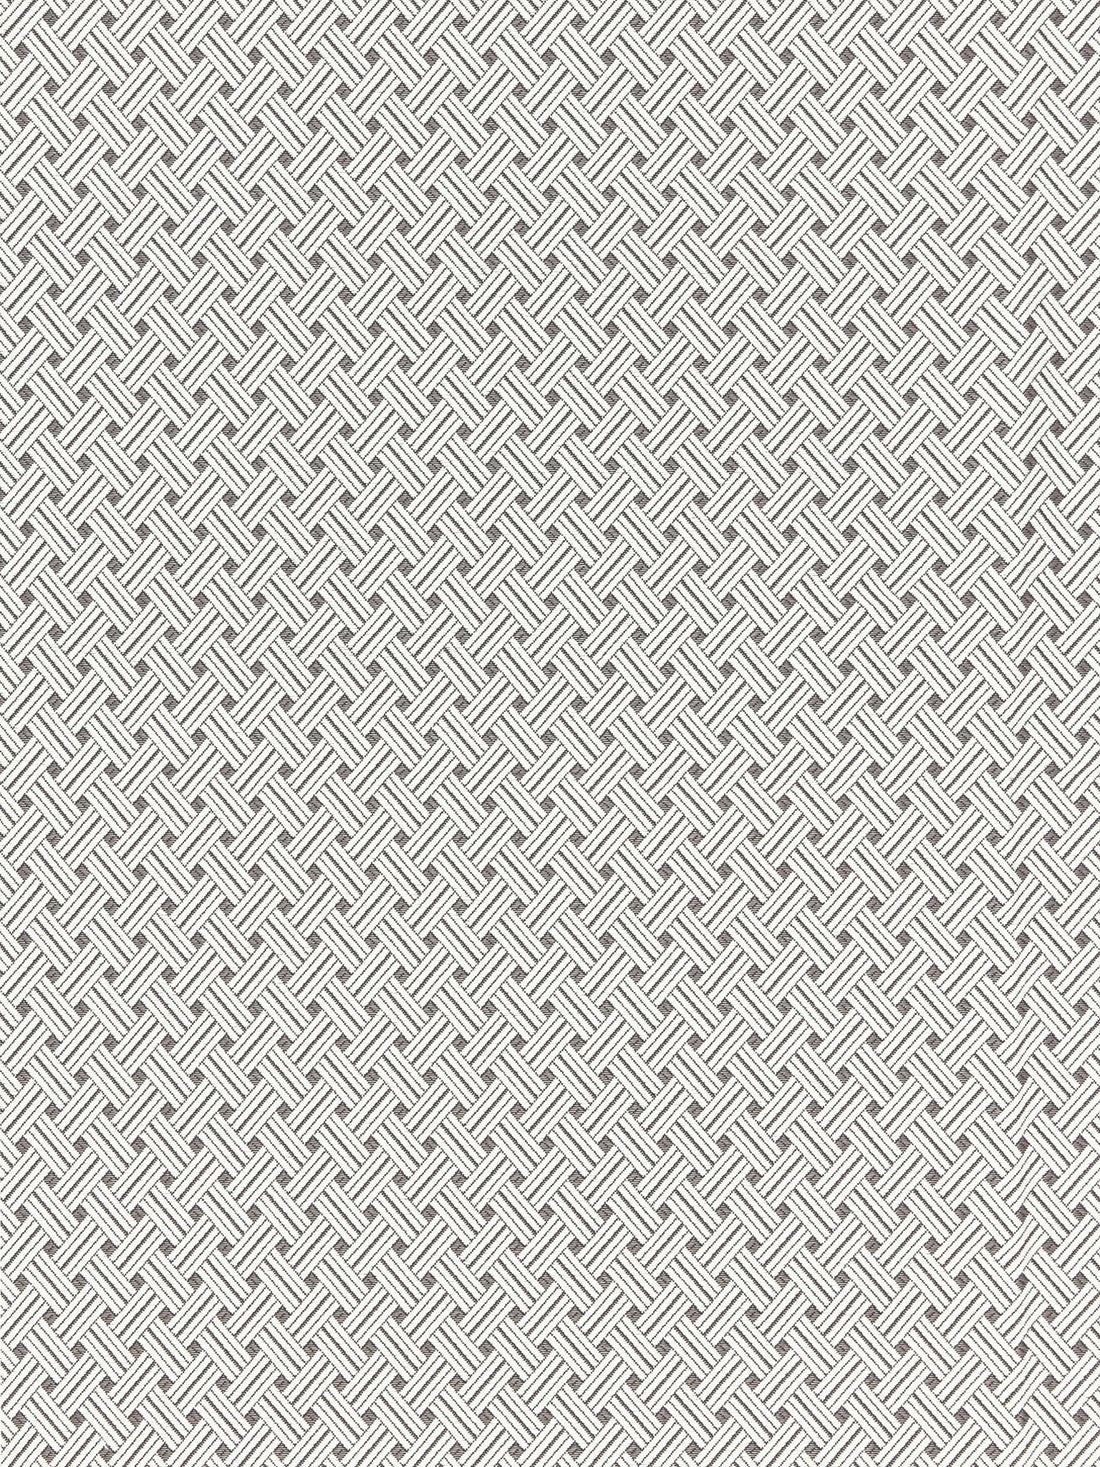 Roatan Weave fabric in pearl grey color - pattern number SC 000227187 - by Scalamandre in the Scalamandre Fabrics Book 1 collection